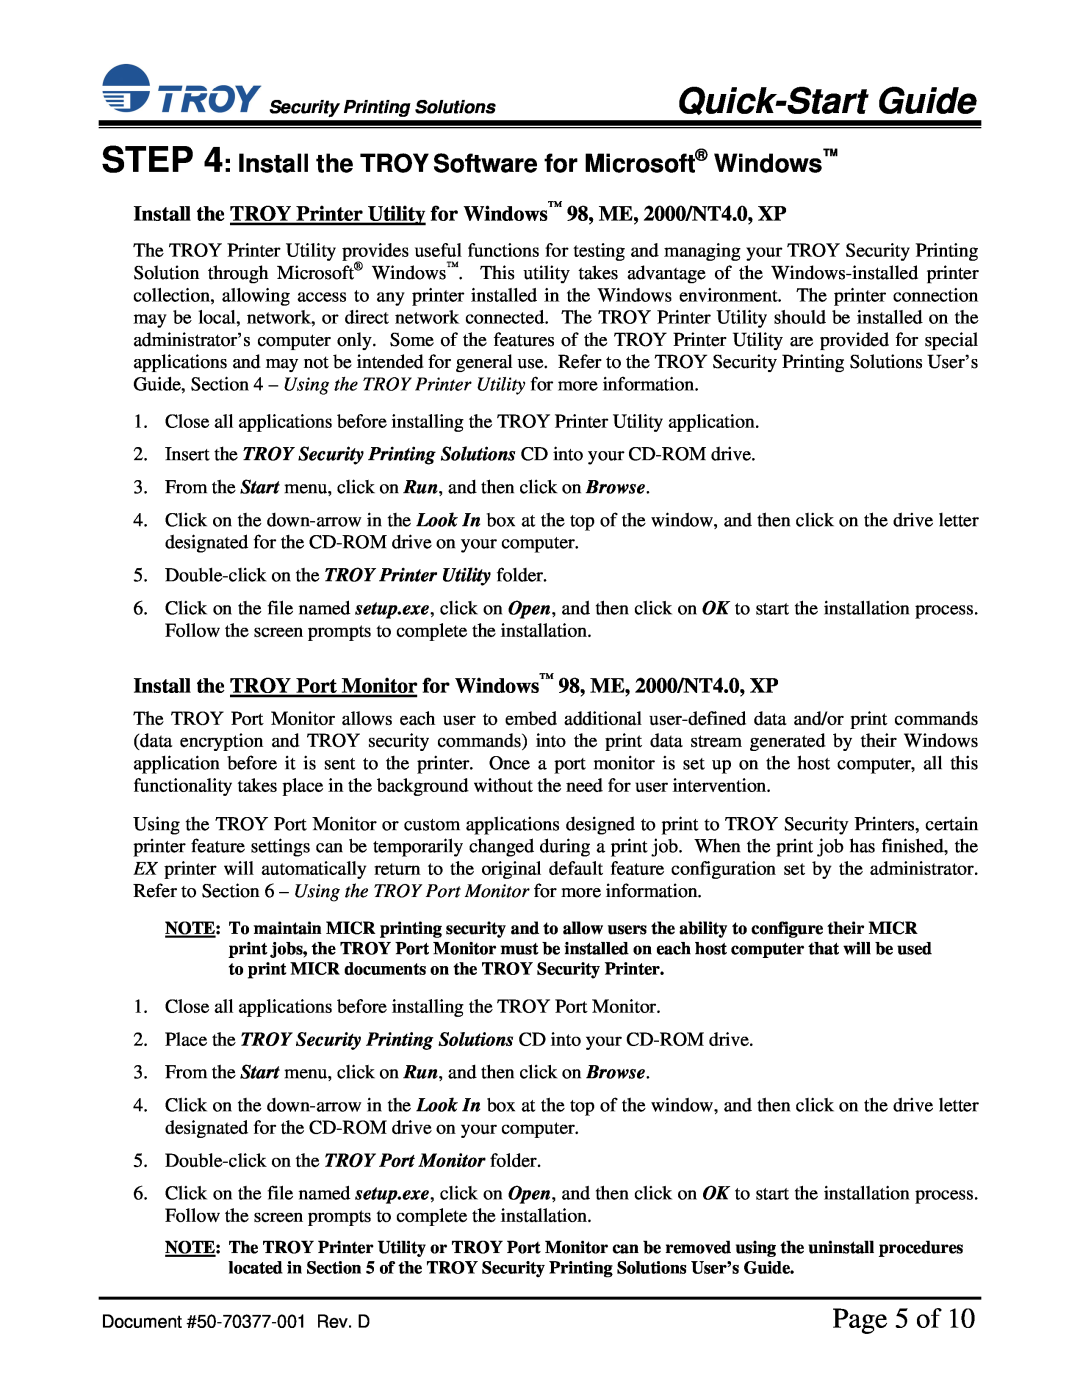 TROY Group IRD 4200 installation instructions Page 5 of, Install the TROY Software for Microsoft Windows, Quick-Start Guide 